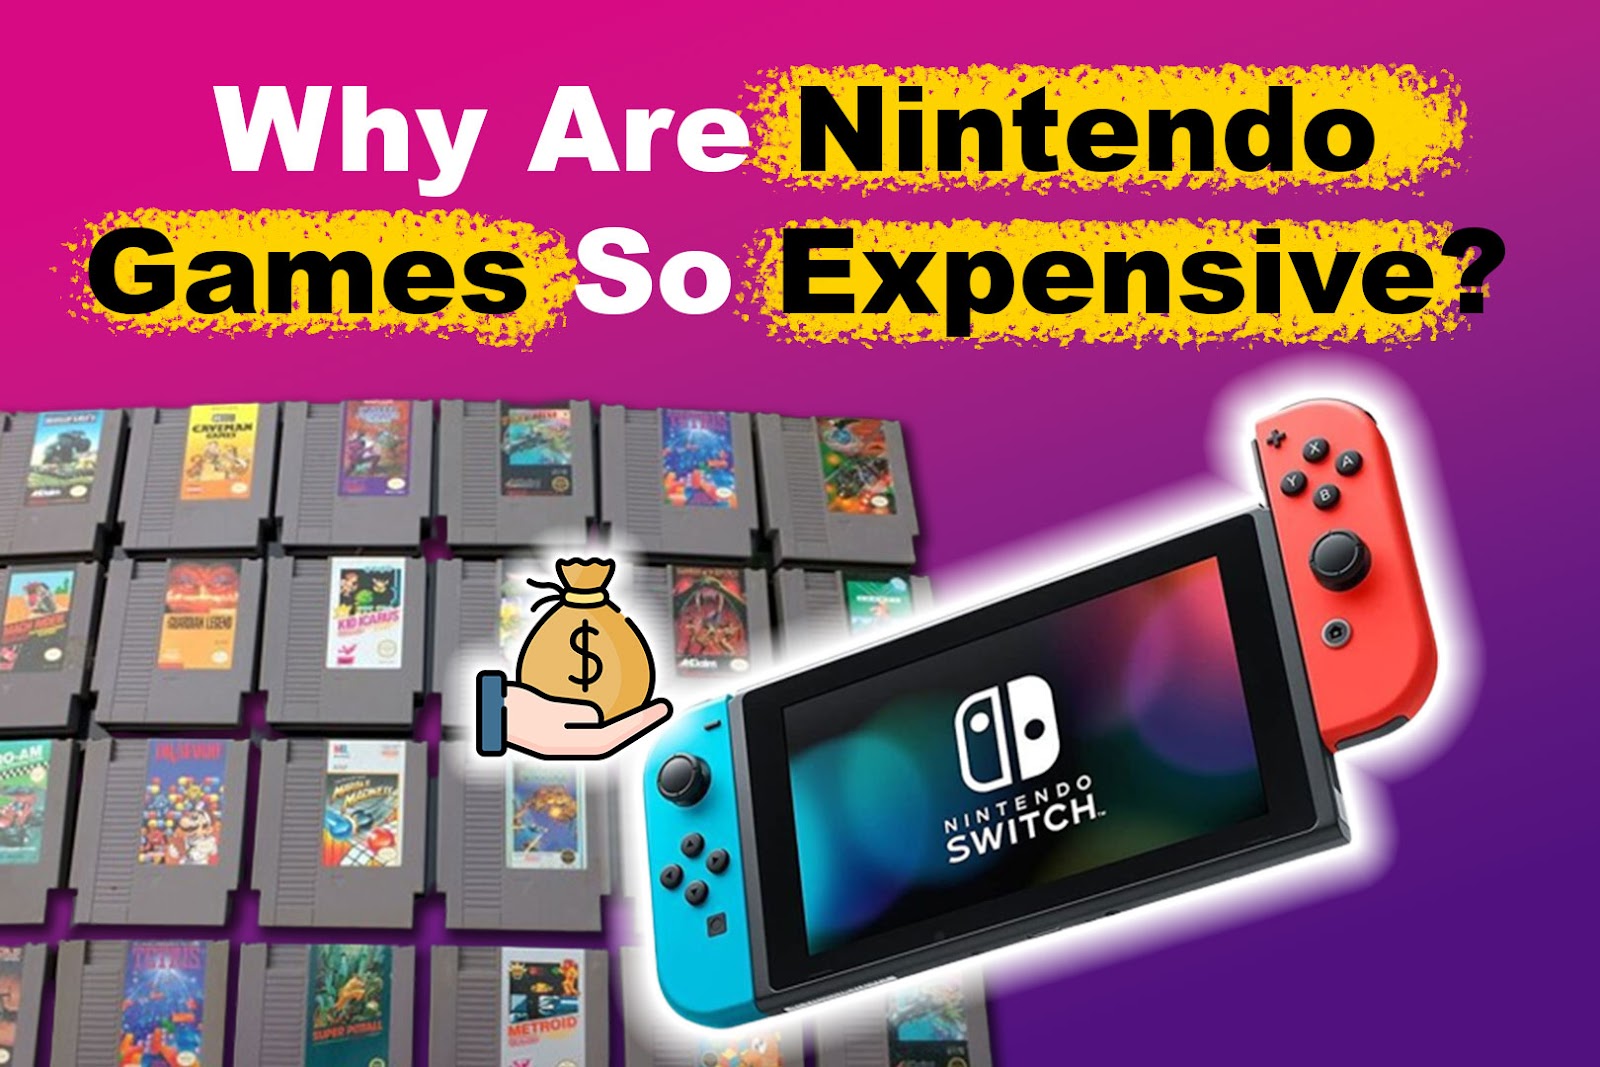 Why Are Nintendo Games So Expensive?